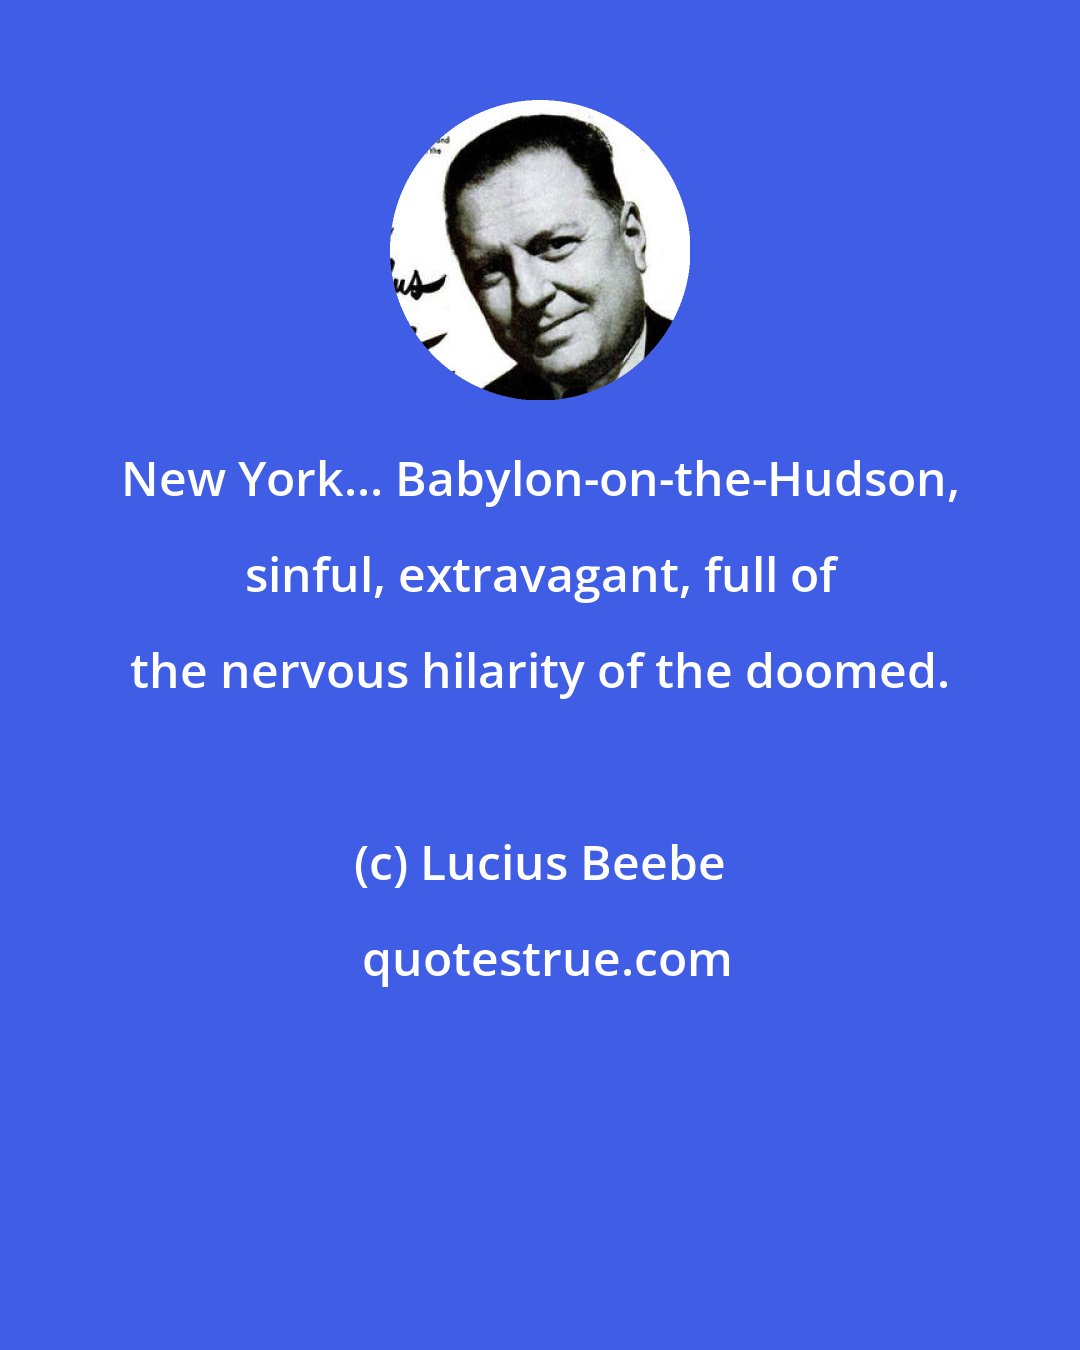 Lucius Beebe: New York... Babylon-on-the-Hudson, sinful, extravagant, full of the nervous hilarity of the doomed.